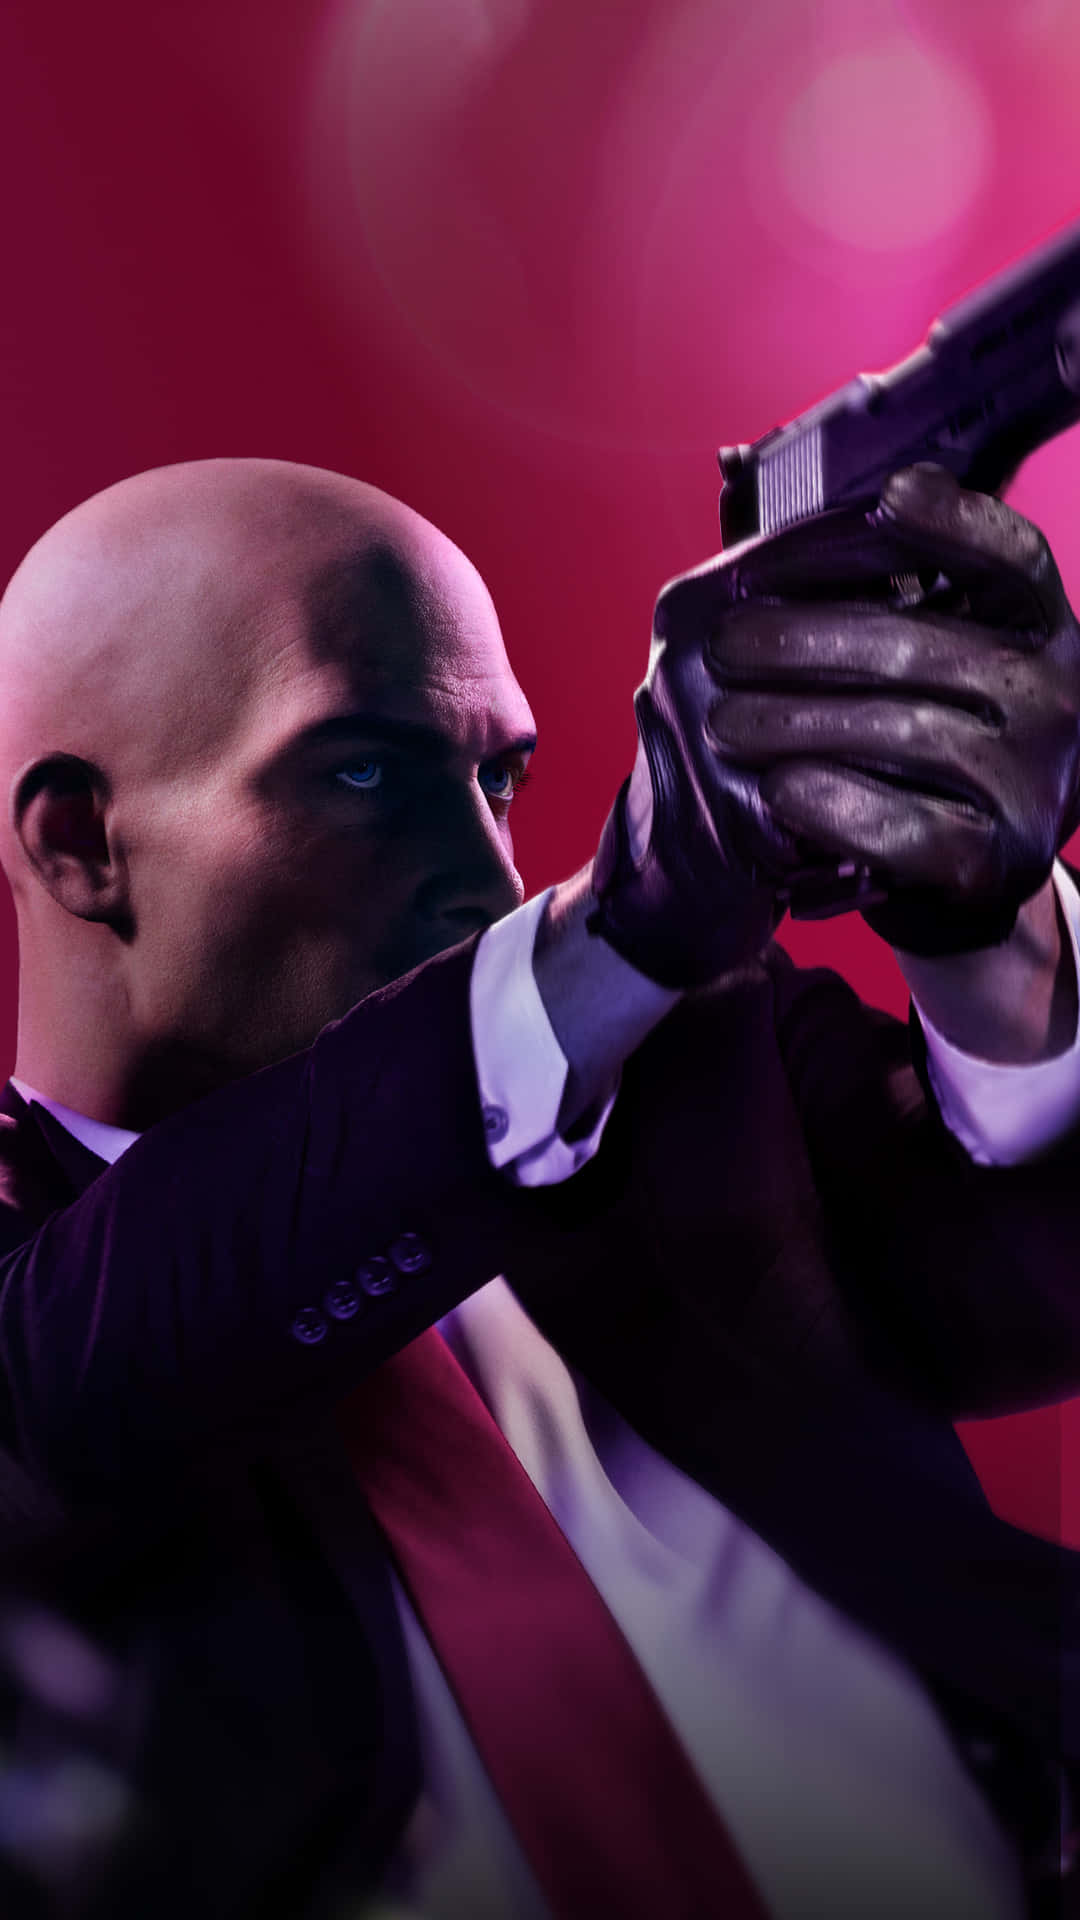 Hitman 2 comes to life on the brand new Iphone X